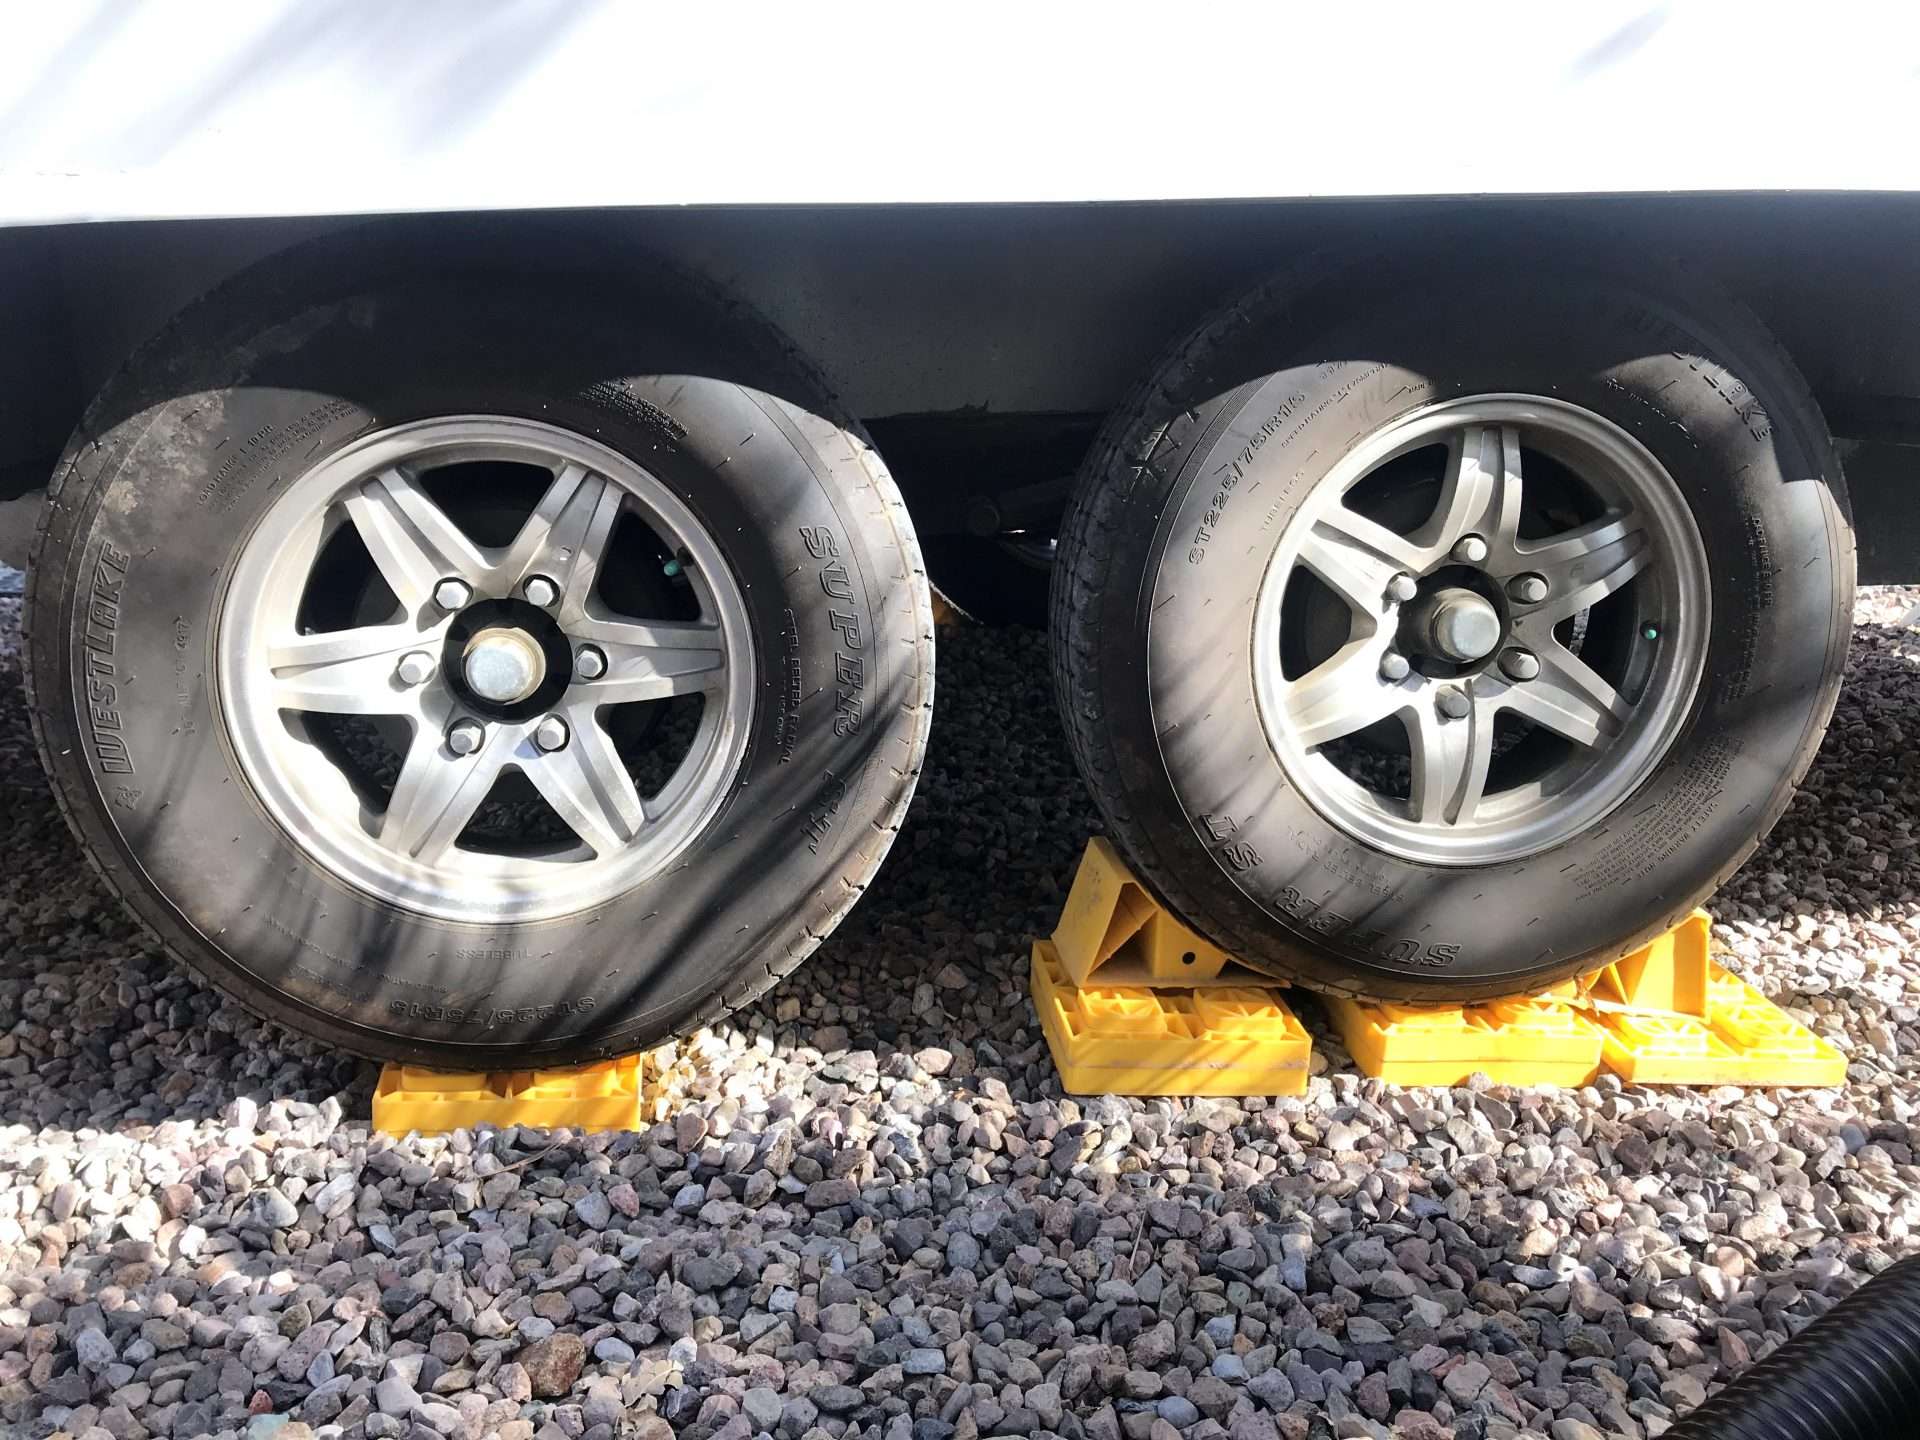 camper wheels parked on block levelers on rocky surface